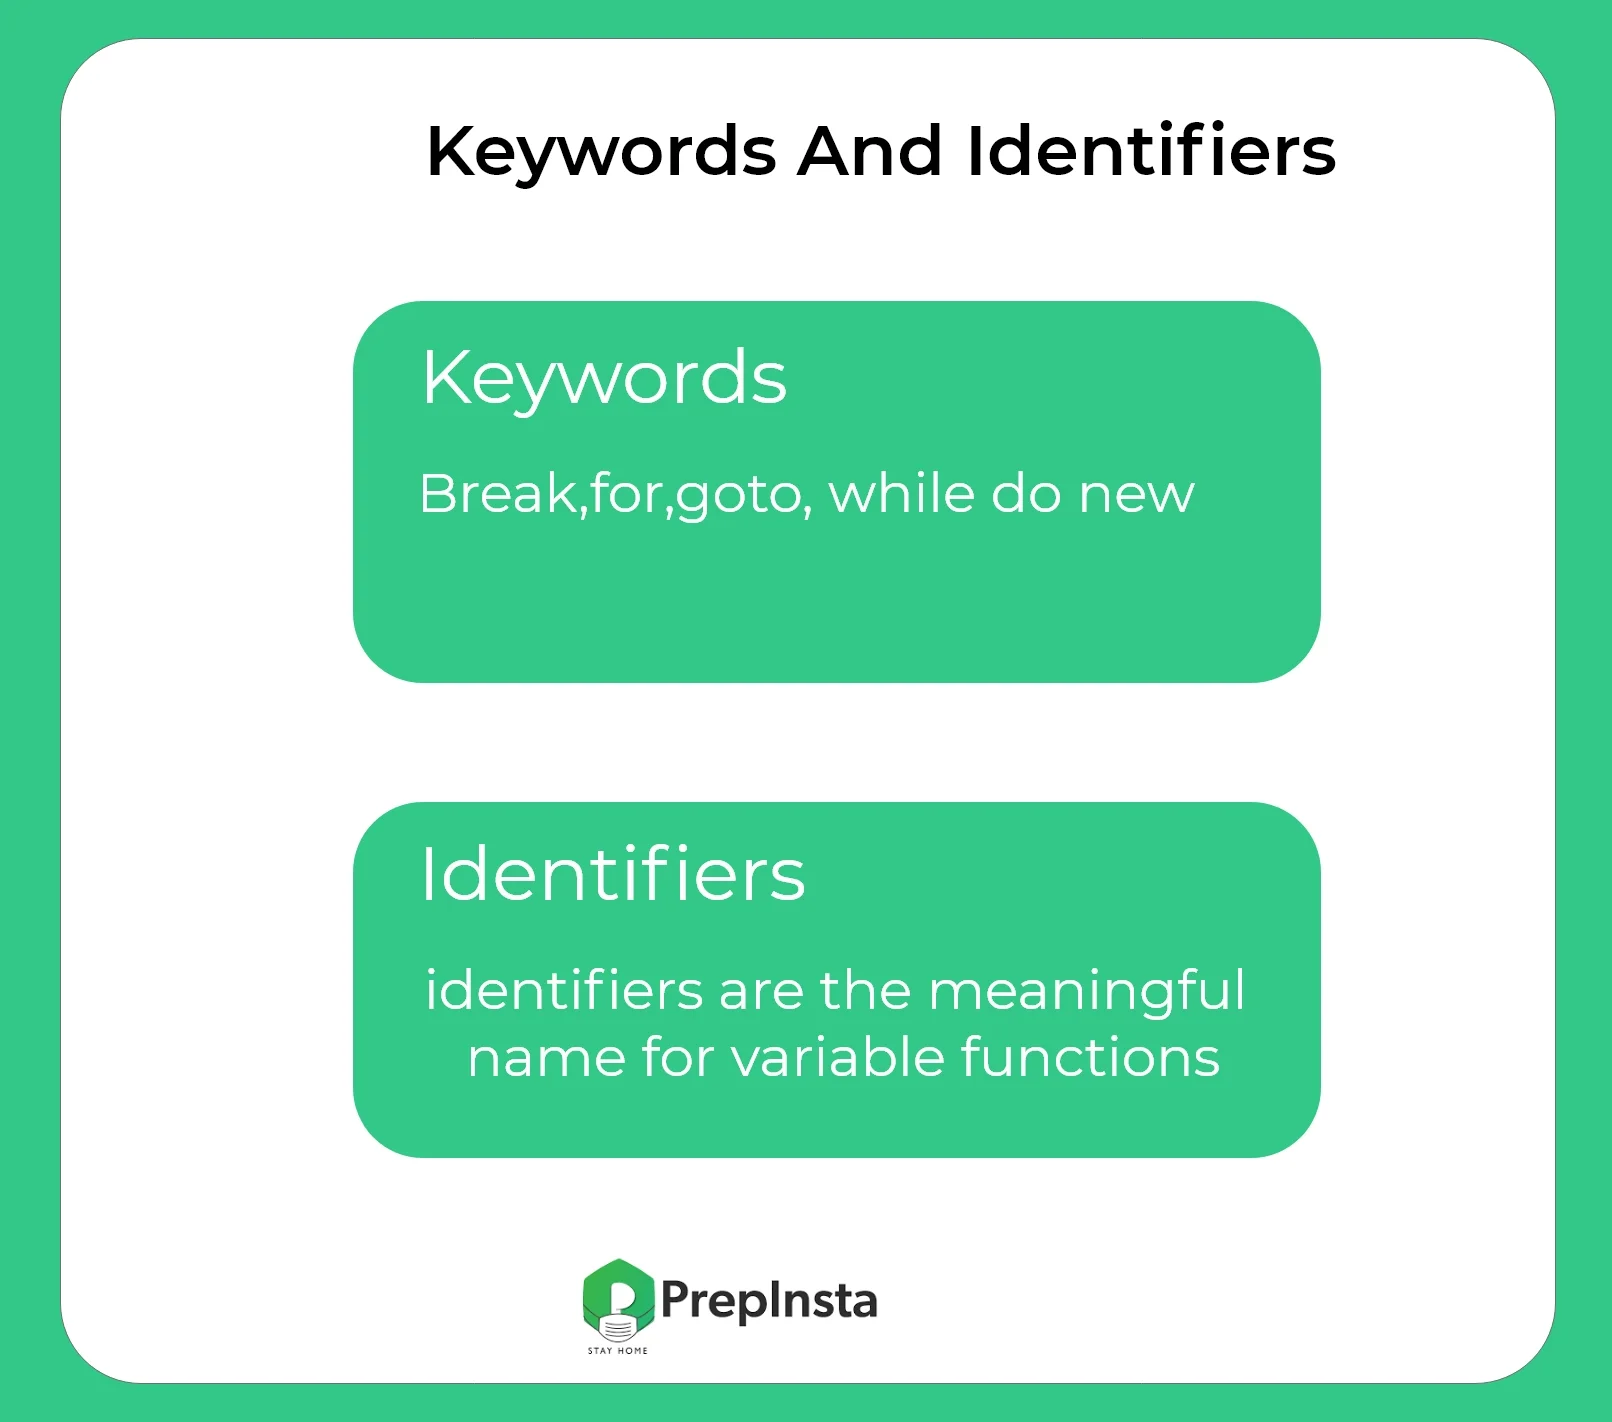 Keywords And Identifiers